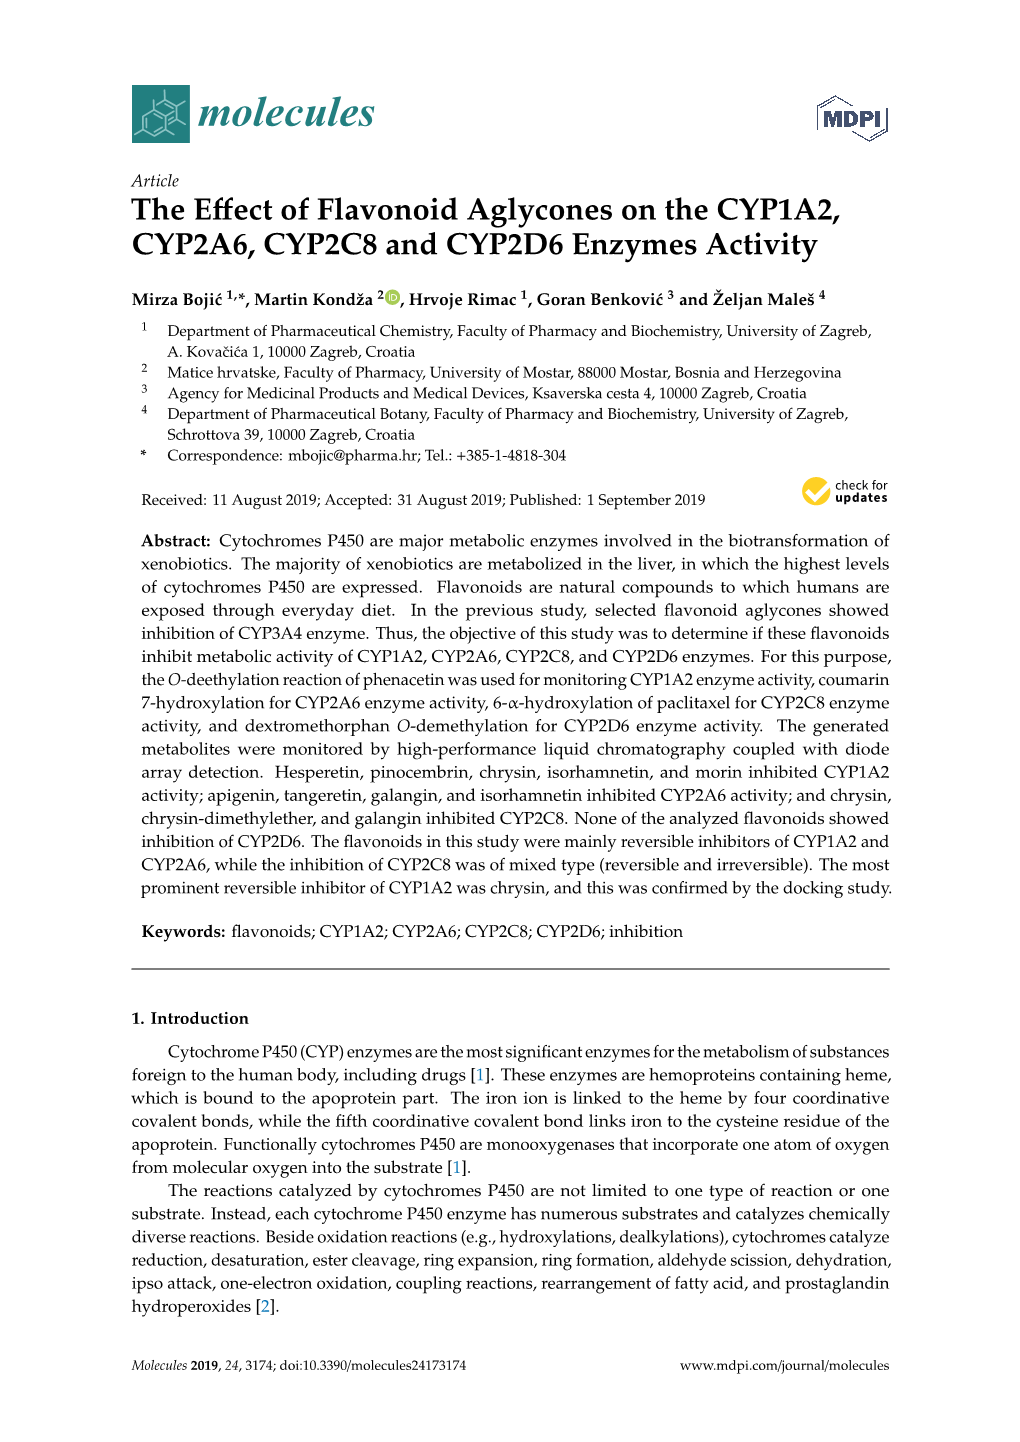 The Effect of Flavonoid Aglycones on the CYP1A2, CYP2A6, CYP2C8